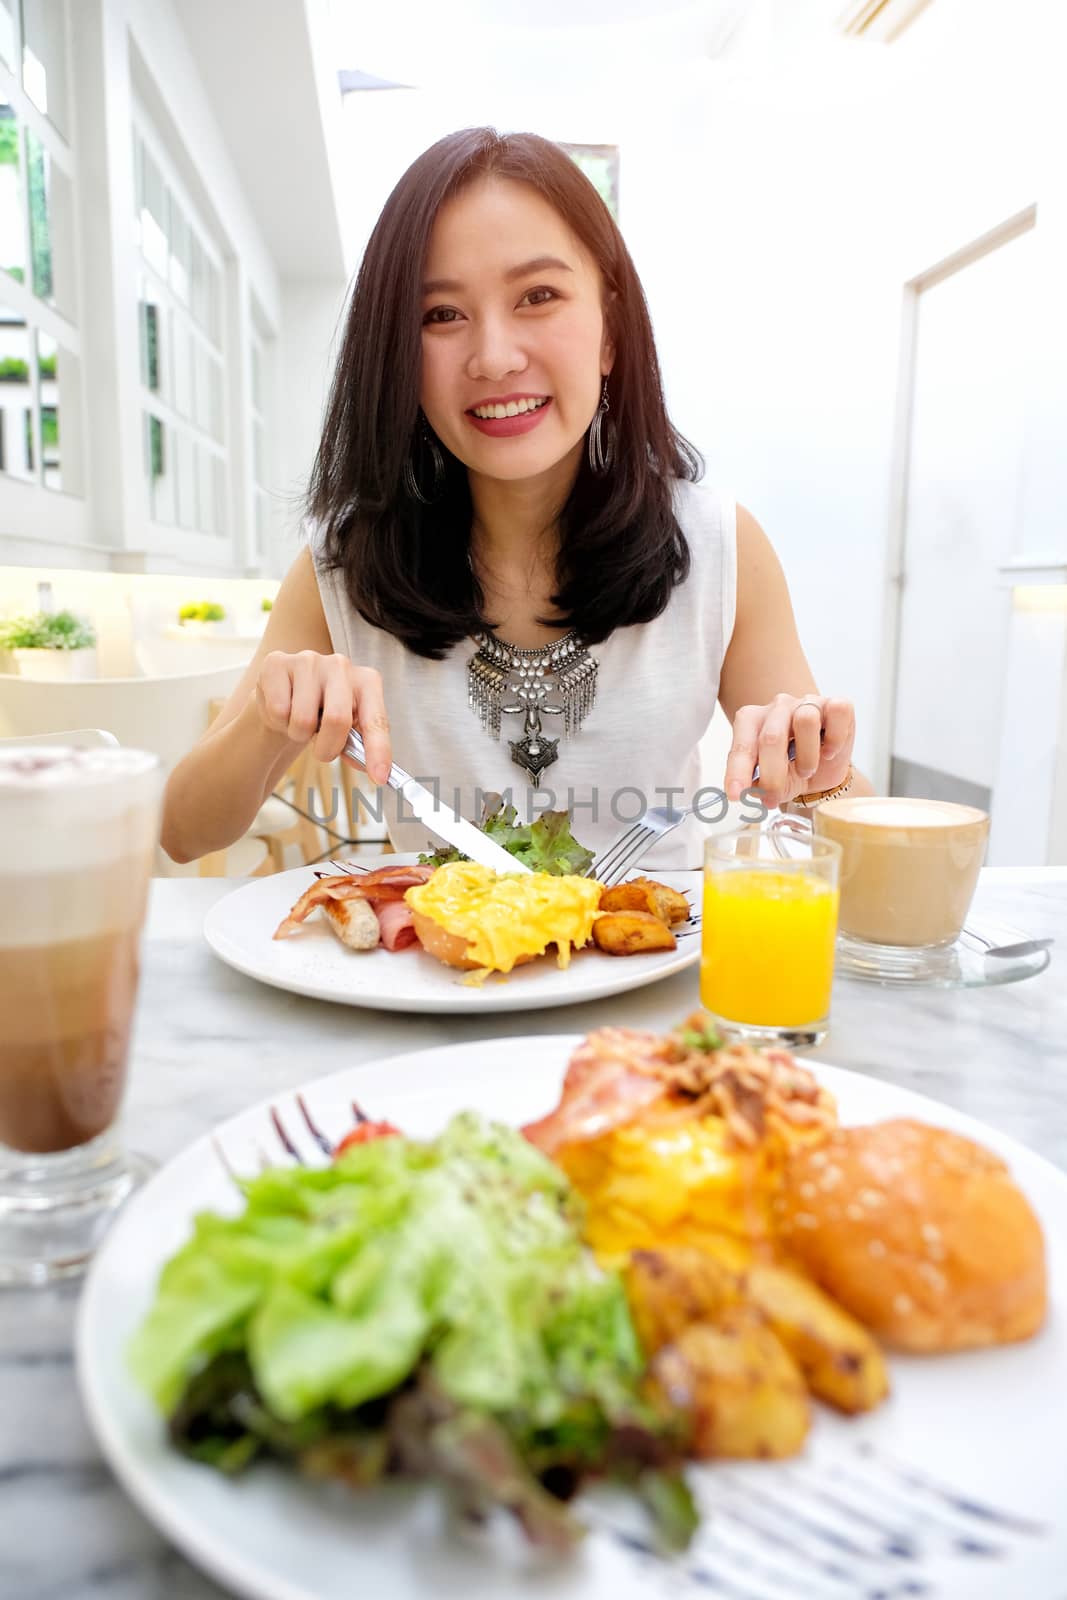 Young woman eating Breakfast - fried egg, beans, tomatoes, mushrooms, bacon and toast.